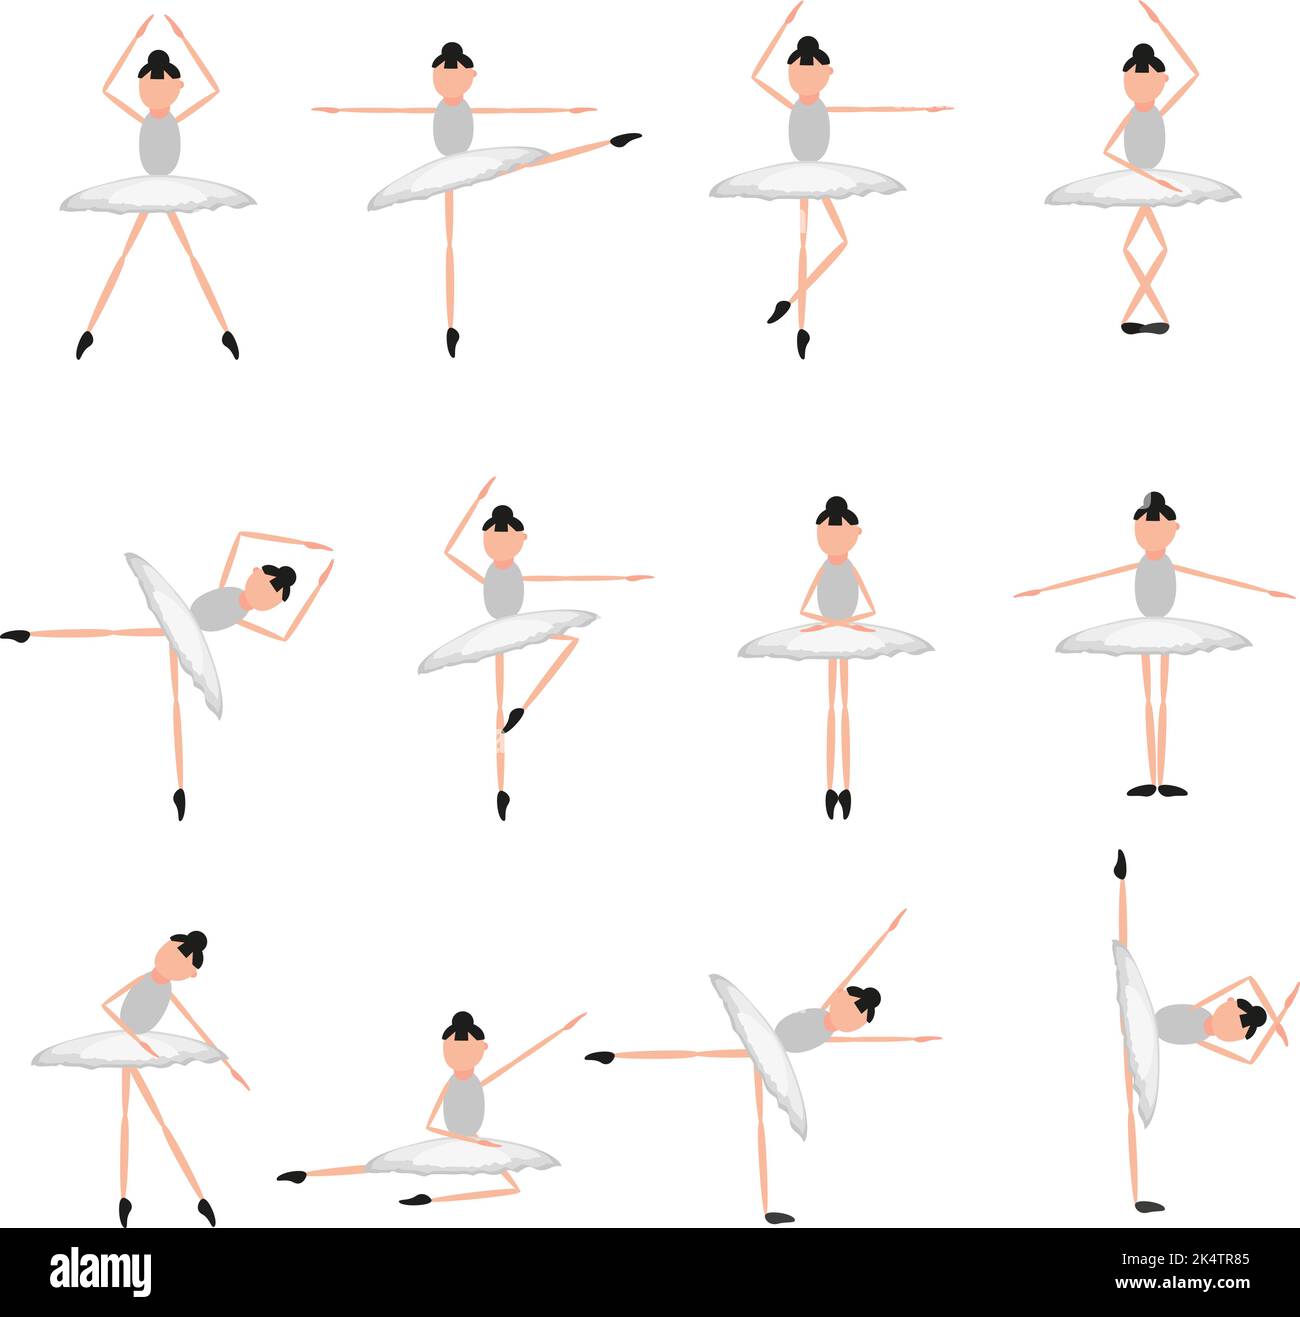 Ballet moves Stock Vector Images - Alamy